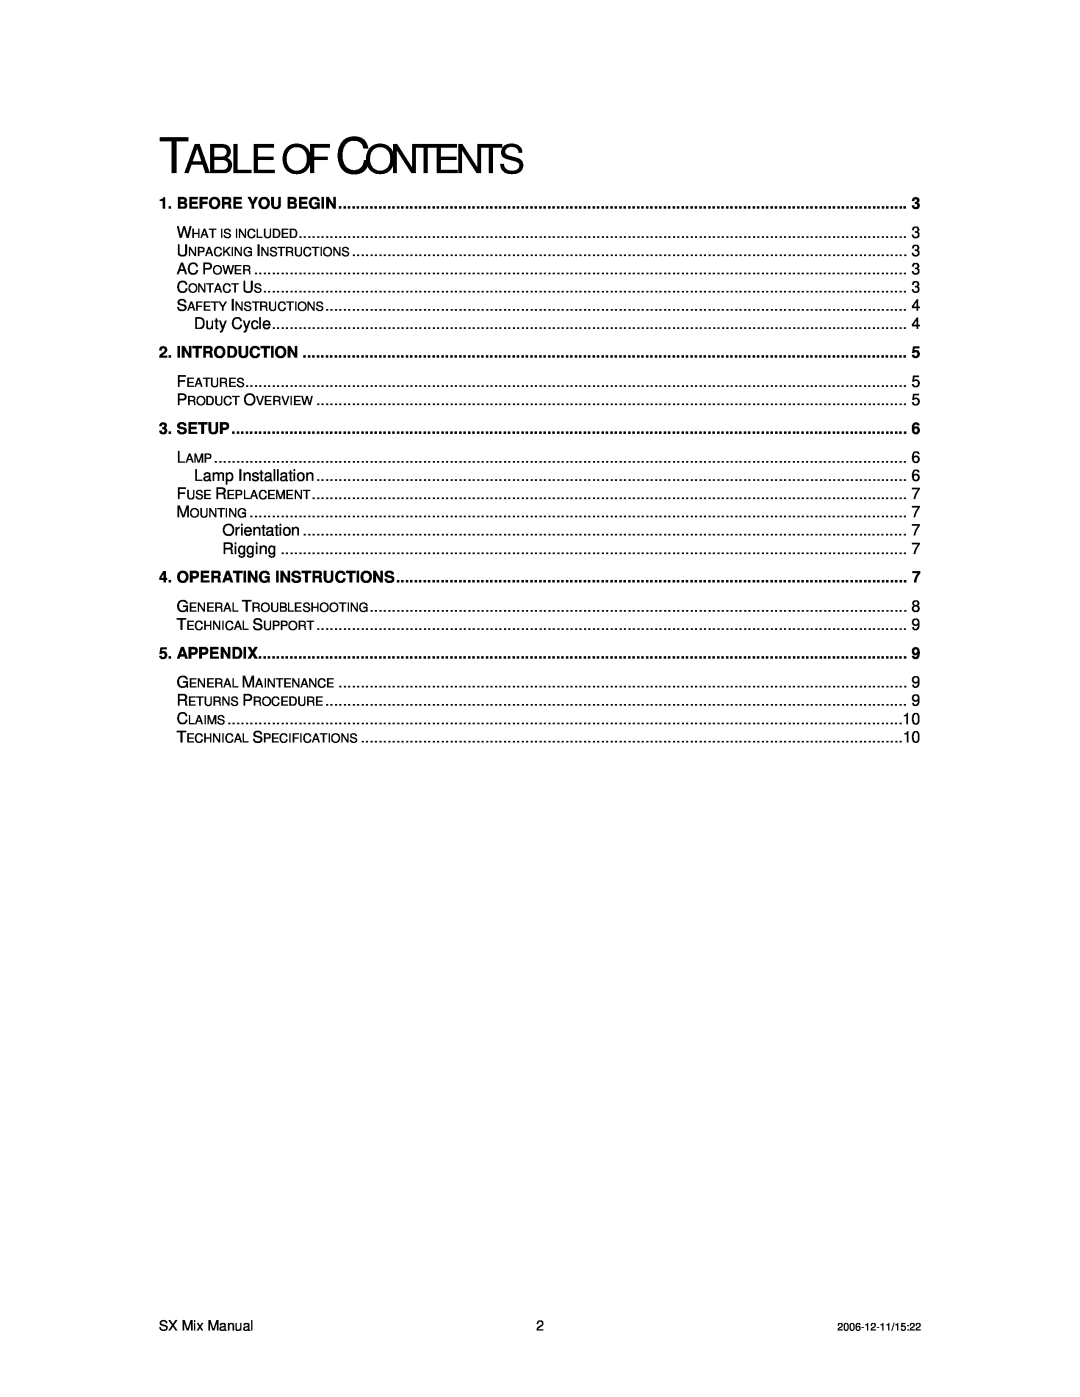 Chauvet DMX512 user manual Table Of Contents, Before You Begin, Introduction, Setup, Operating Instructions, Appendix 